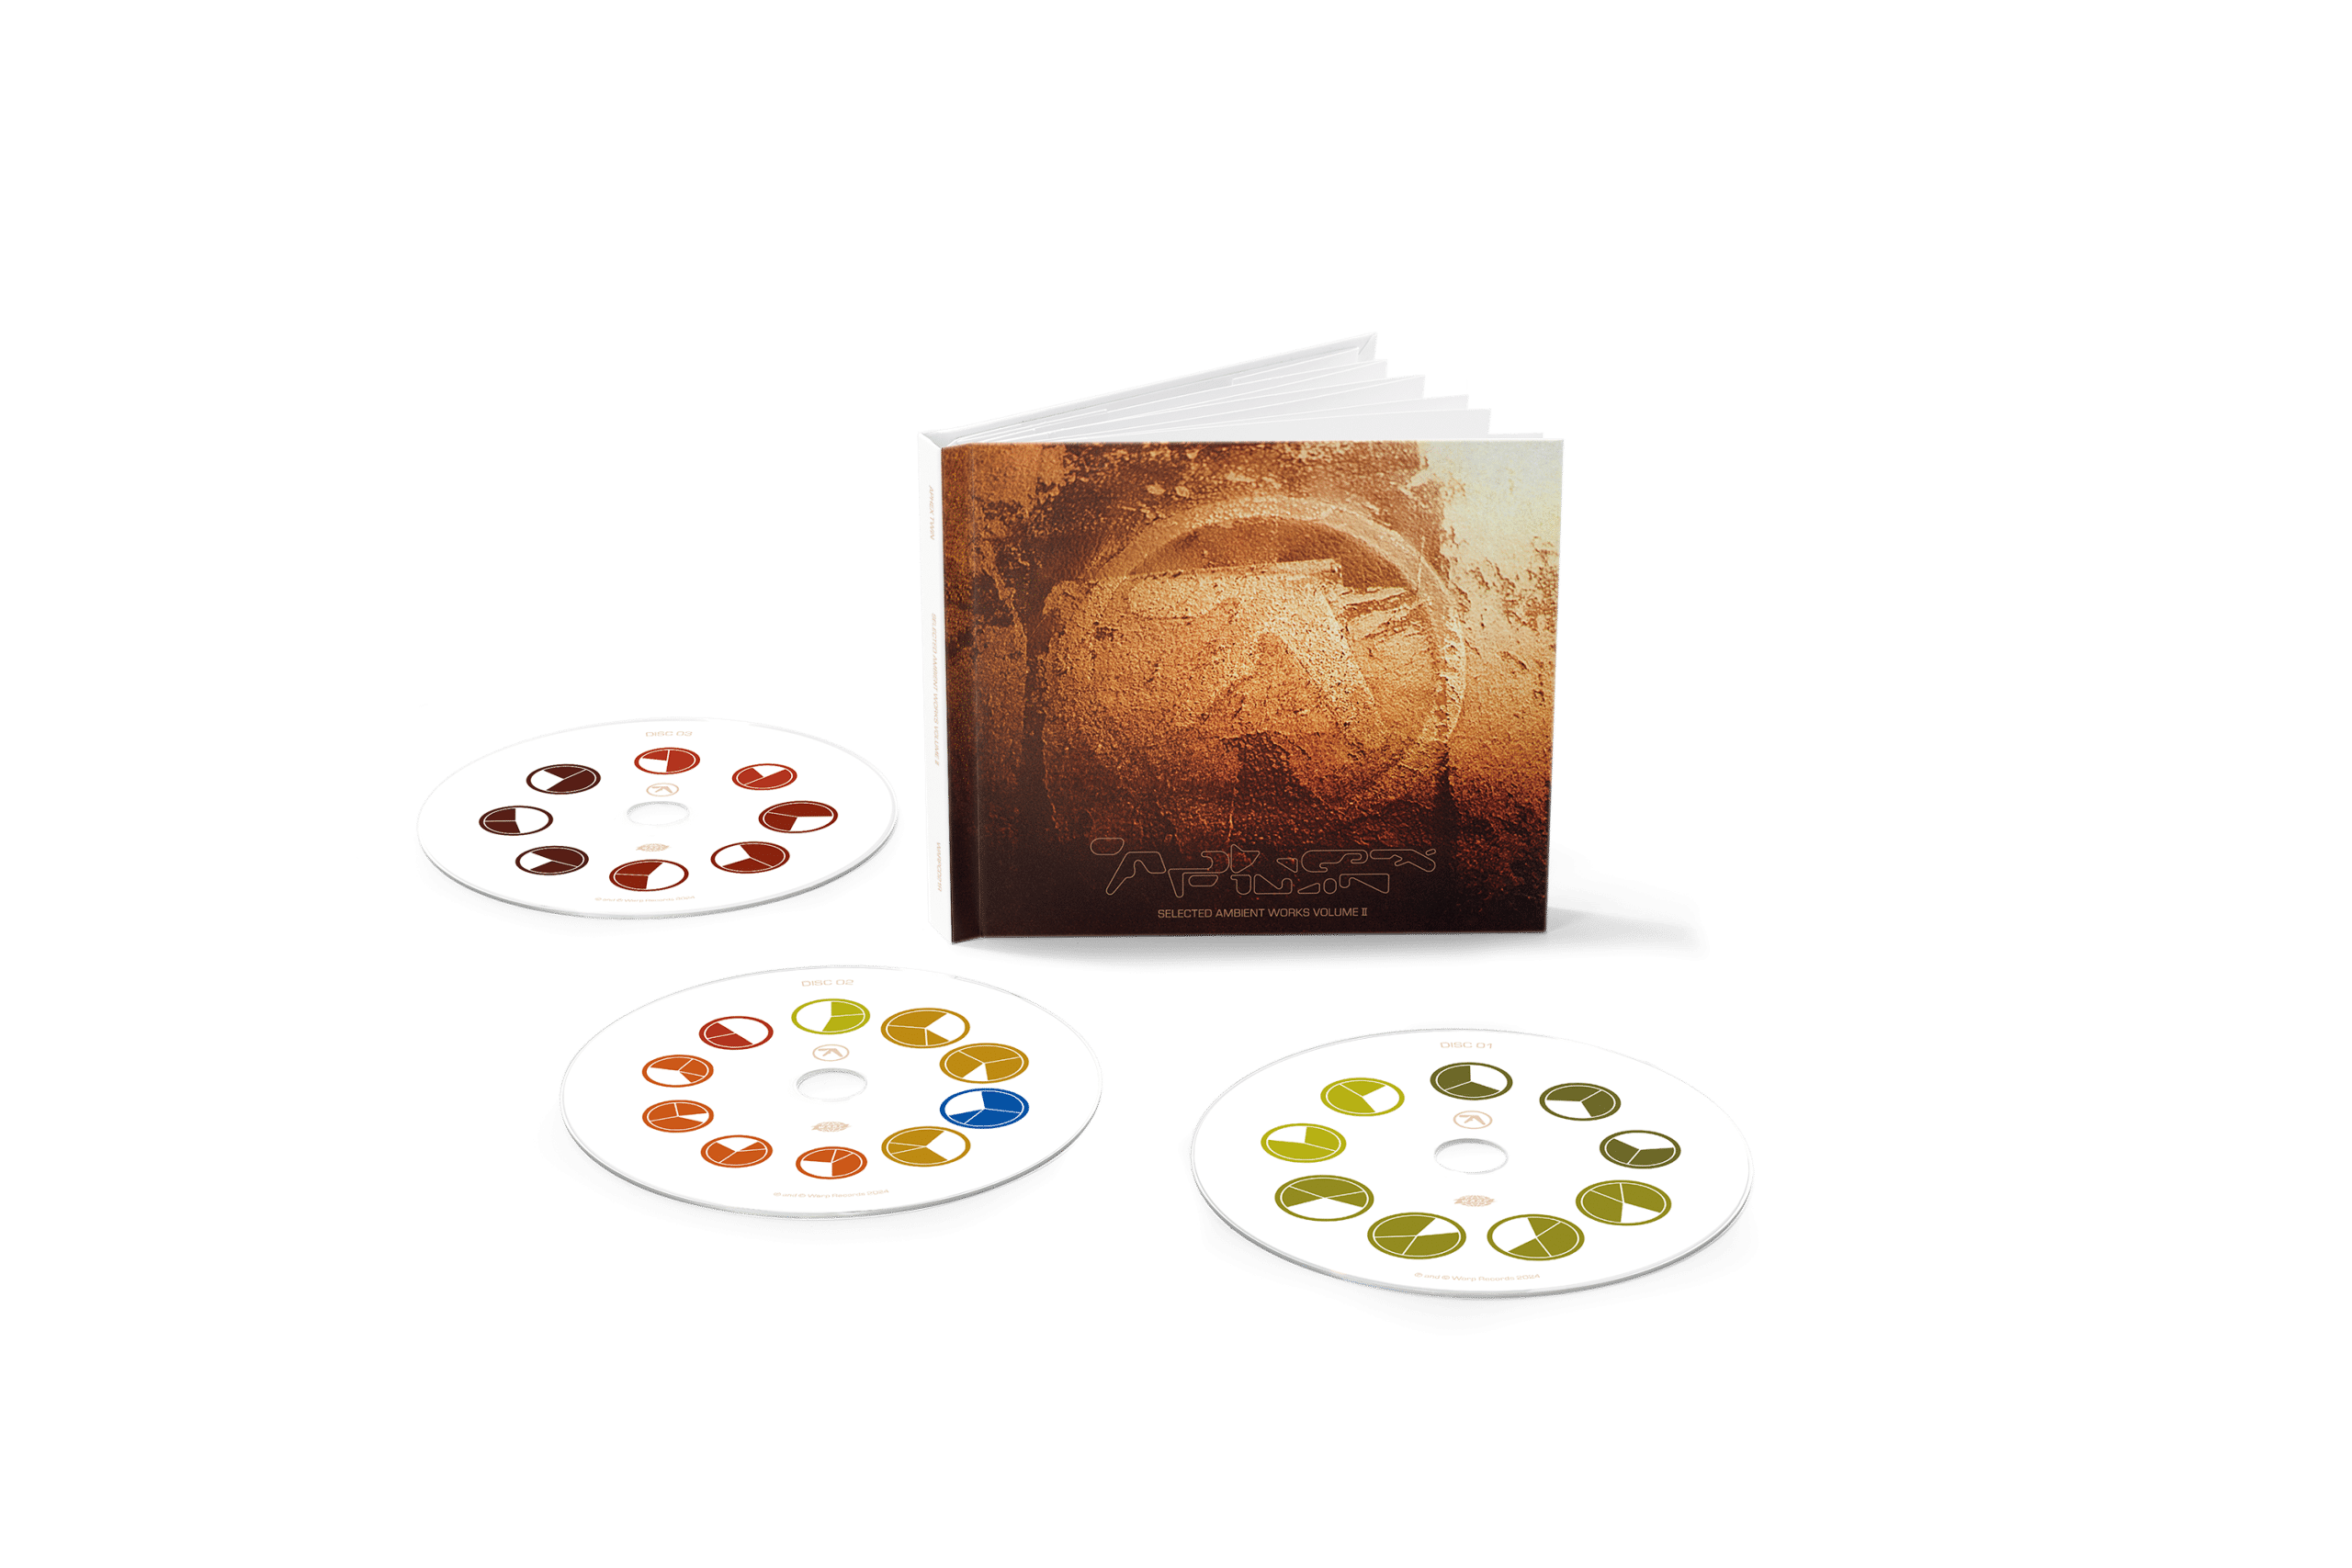 Aphex Twin - Selected Ambient Works Volume II (Expanded Edition)